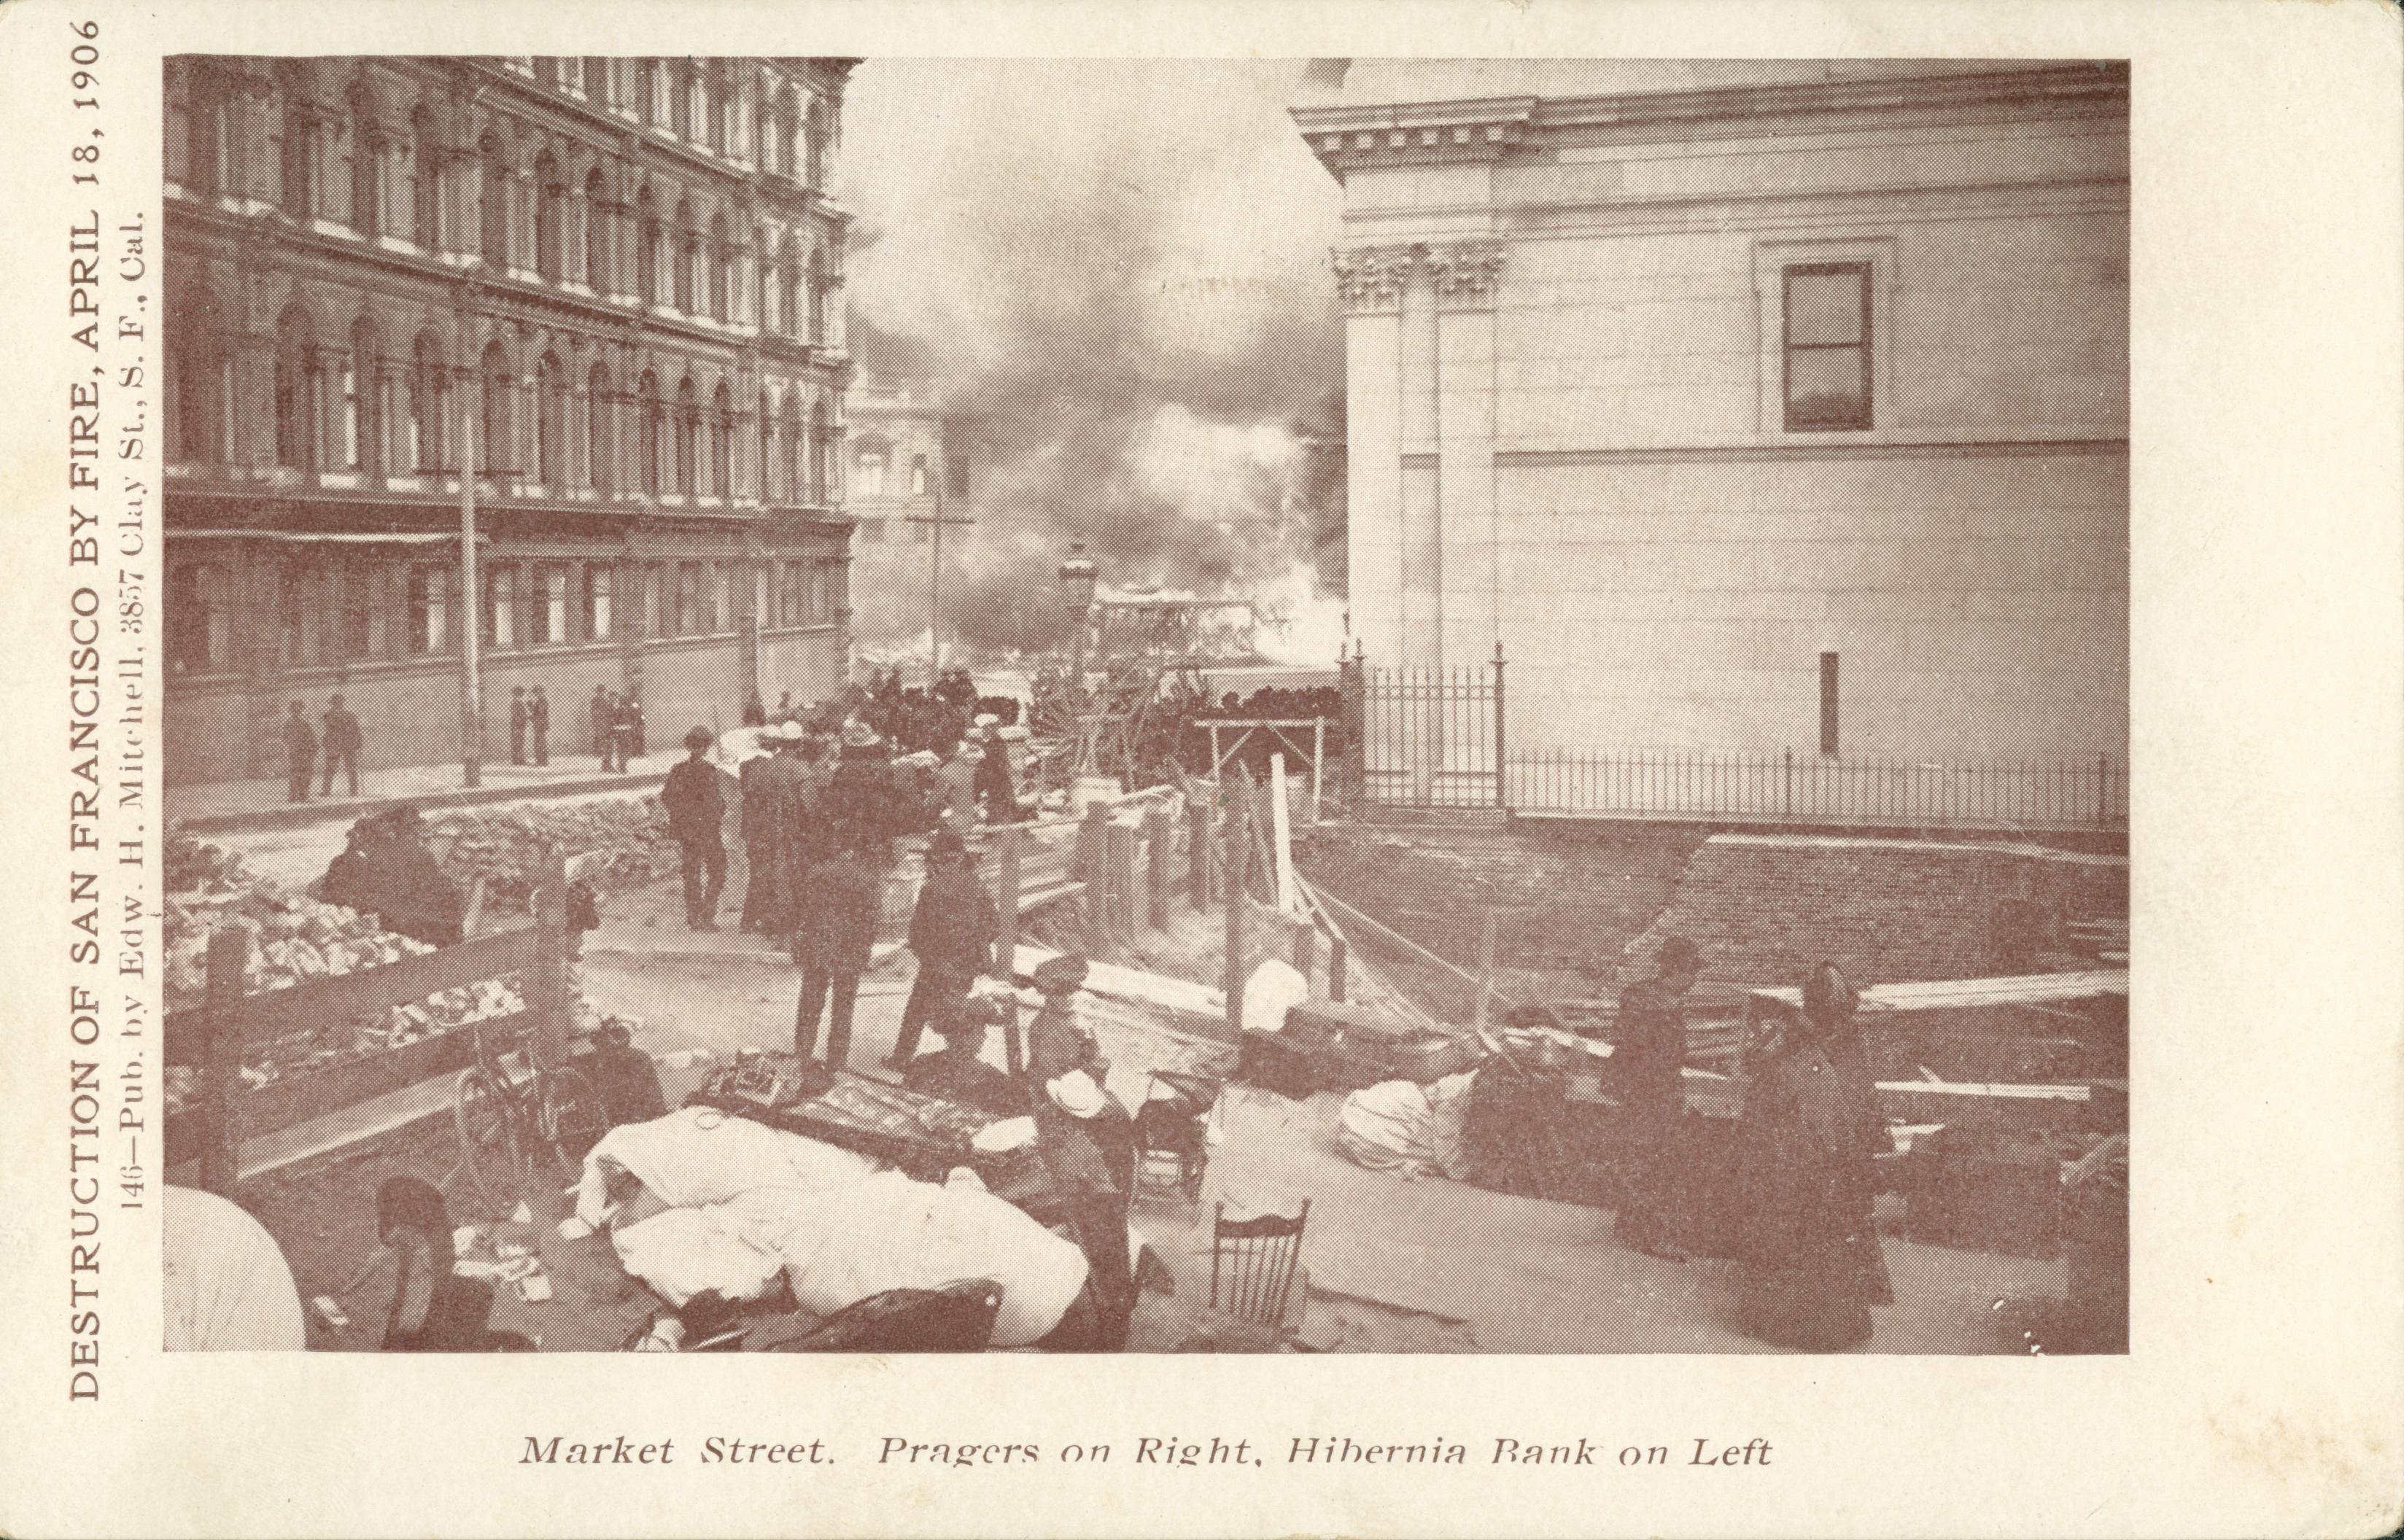 Shows people watching a fire on Market Street, San Francisco, California.